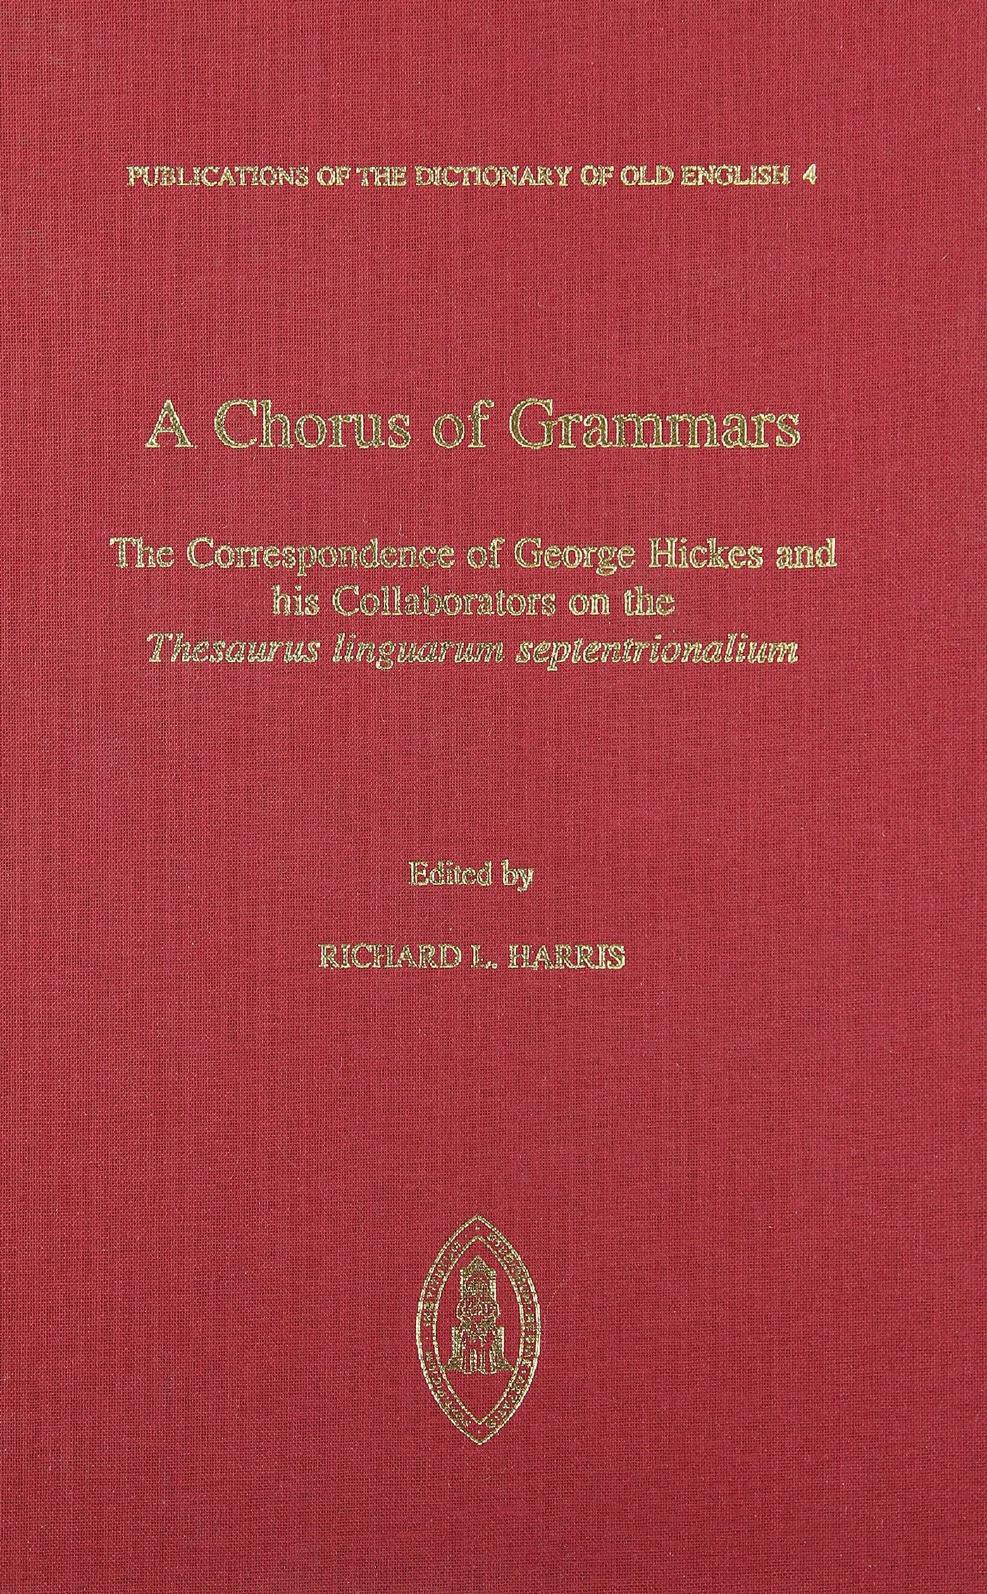 A Chorus of Grammars: The Correspondence of George Hickes and His Collaborators on the Thesaurus Linguarum Septentrionalium